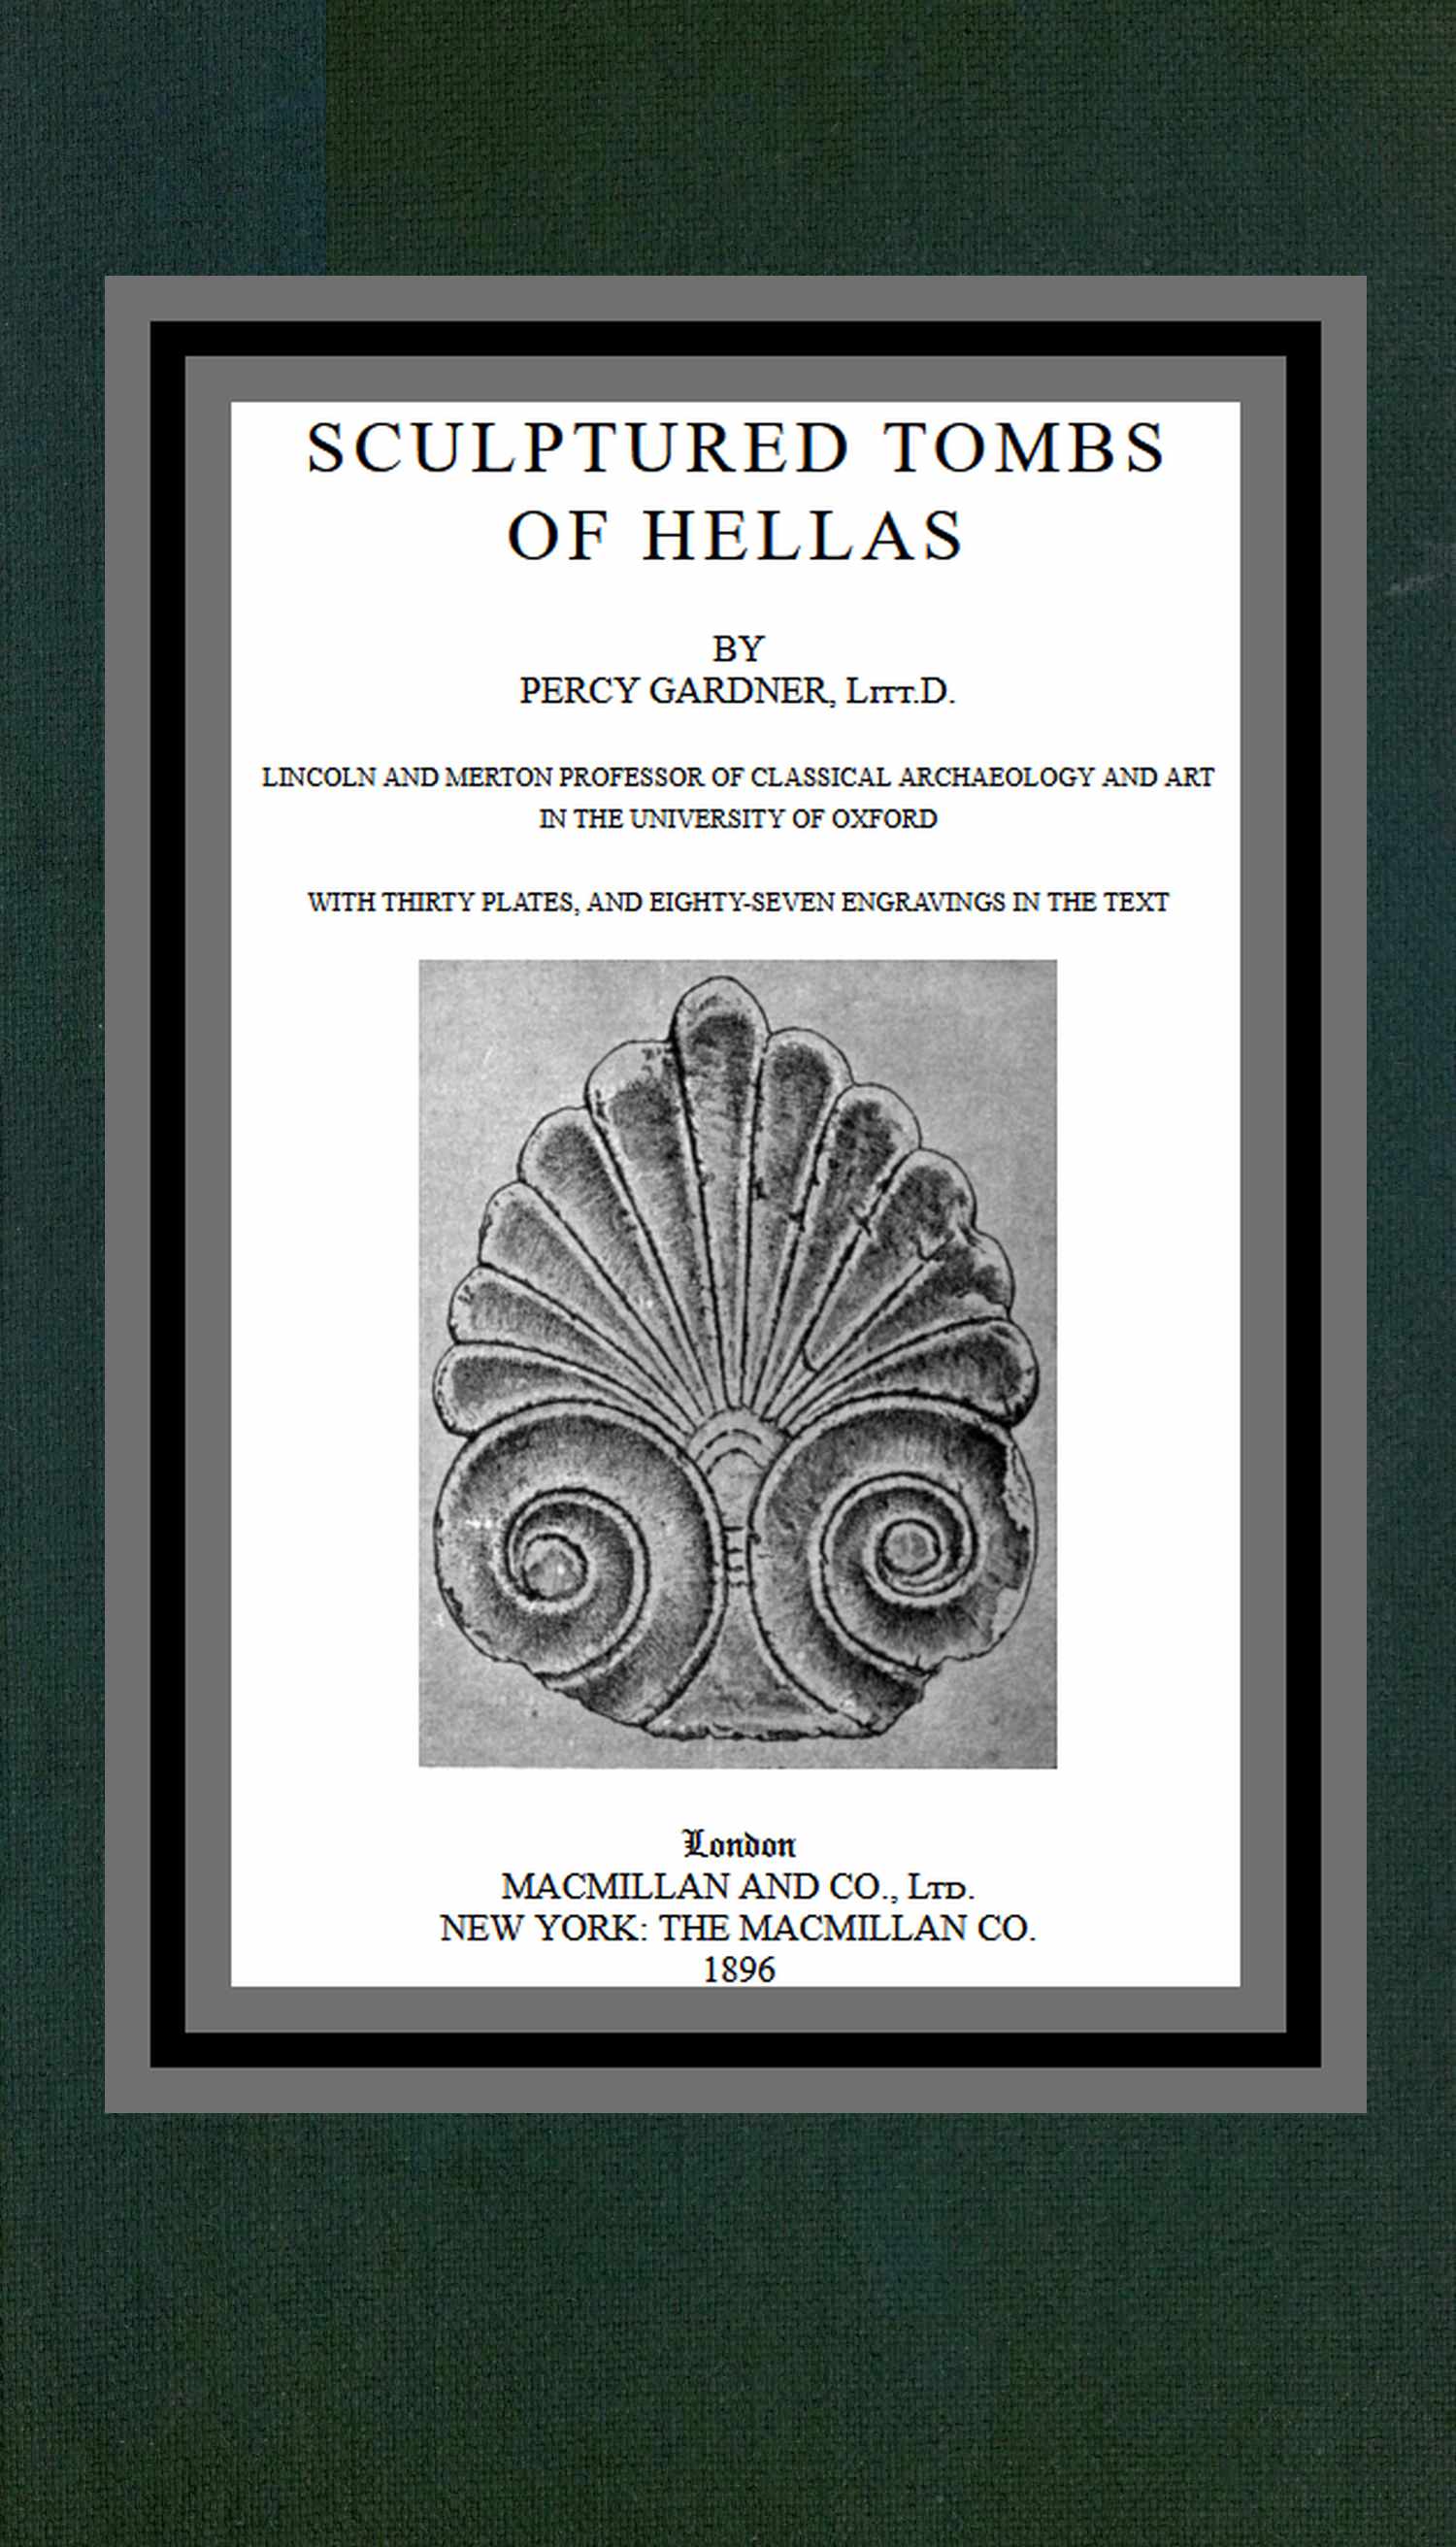 The Project Gutenberg eBook of Sculptured tombs of Hellas, by Percy Gardner.